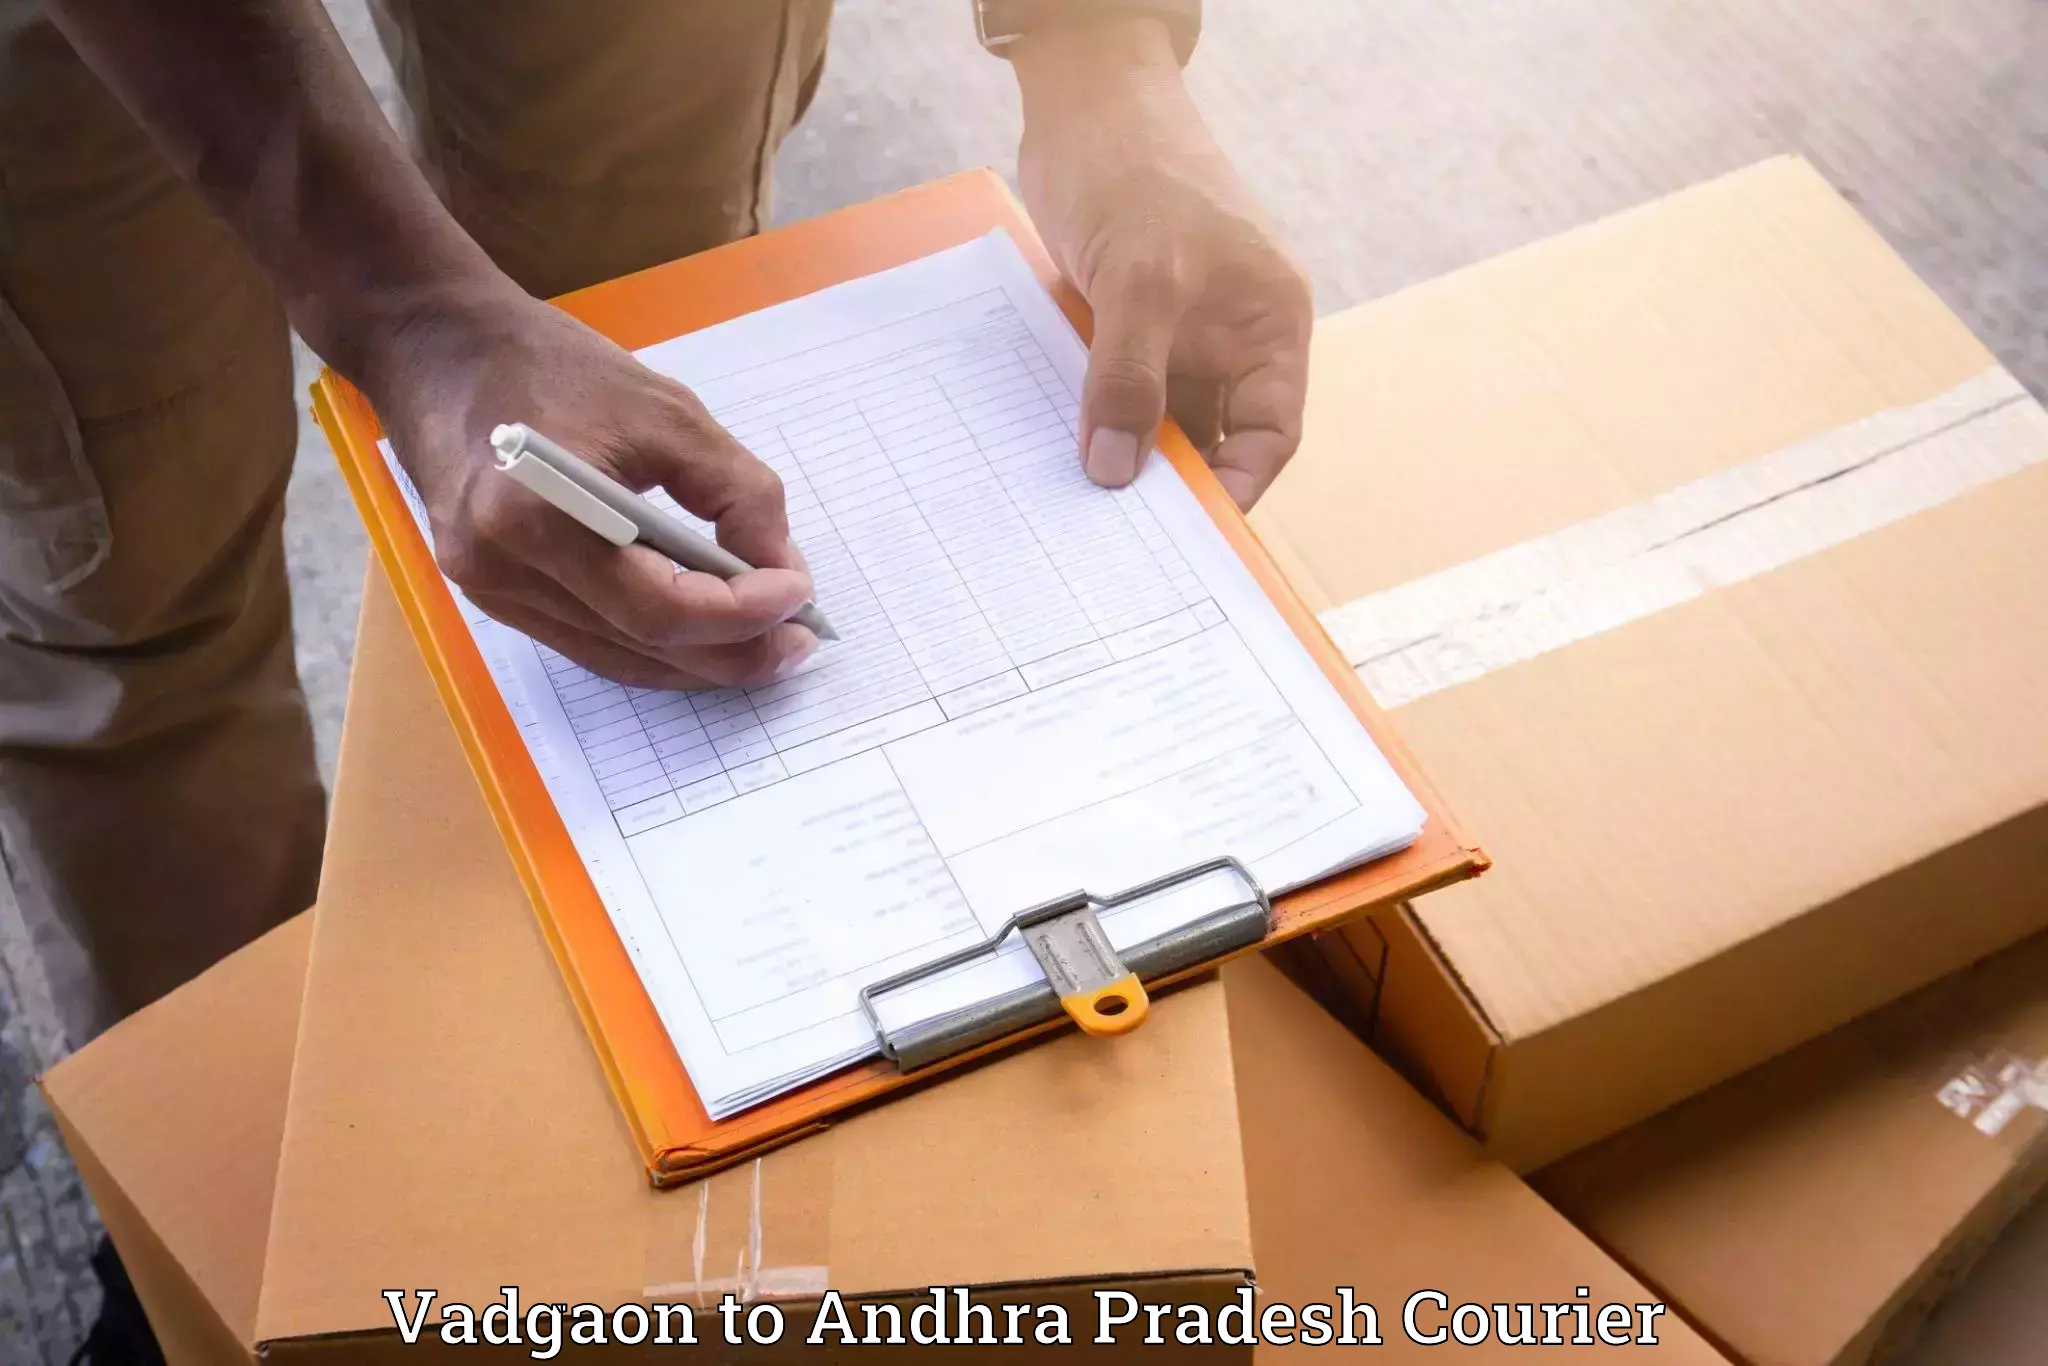 Furniture moving specialists Vadgaon to Visakhapatnam